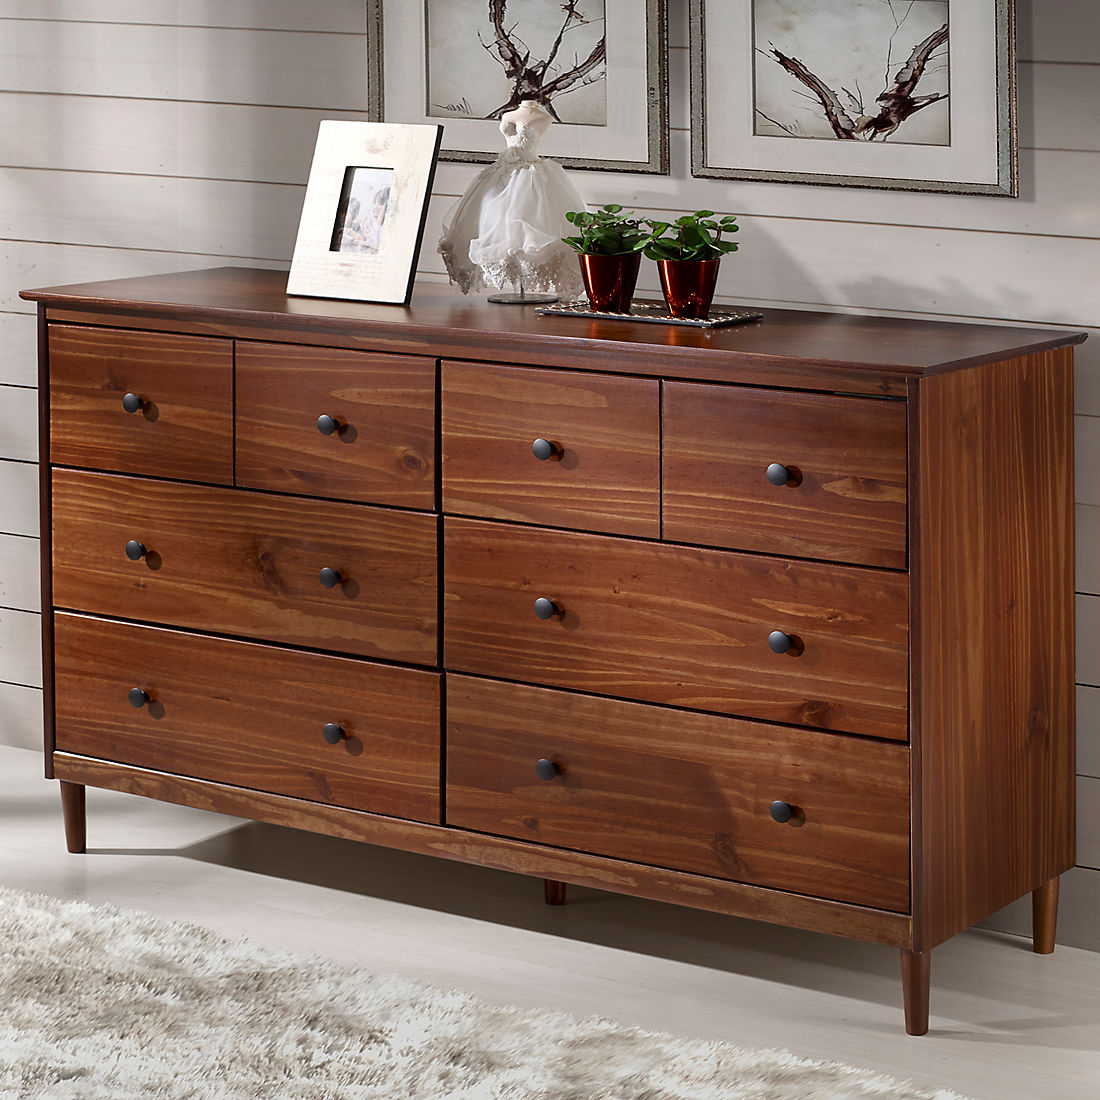 W Trends 6 Drawer Solid Wood Youth, 6 Drawer Real Wood Dresser